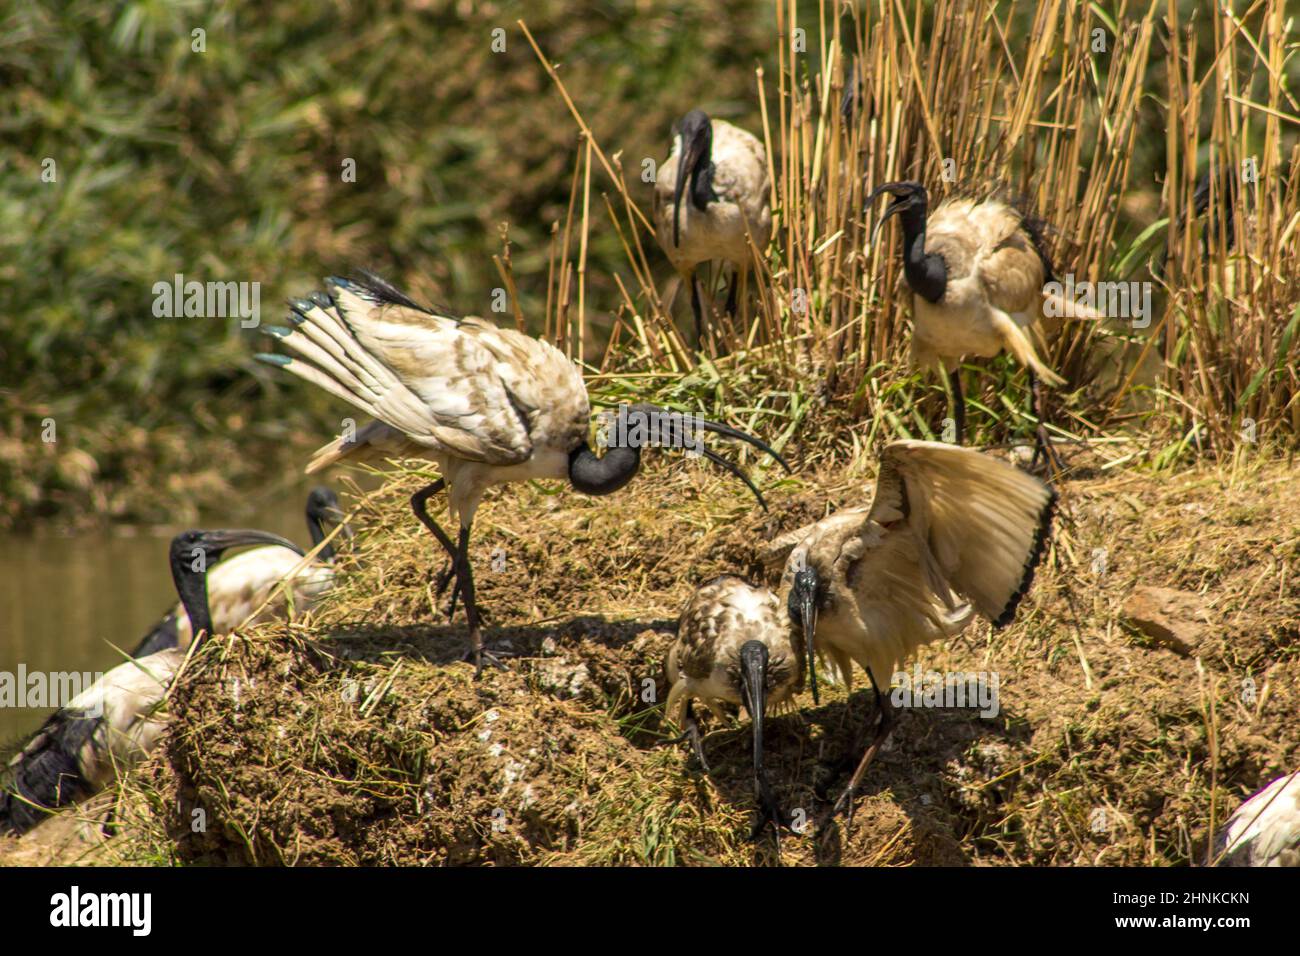 A flock of sacred ibises, interacting with each other and displaying with their wings spread at a birding dam in South Africa. Stock Photo